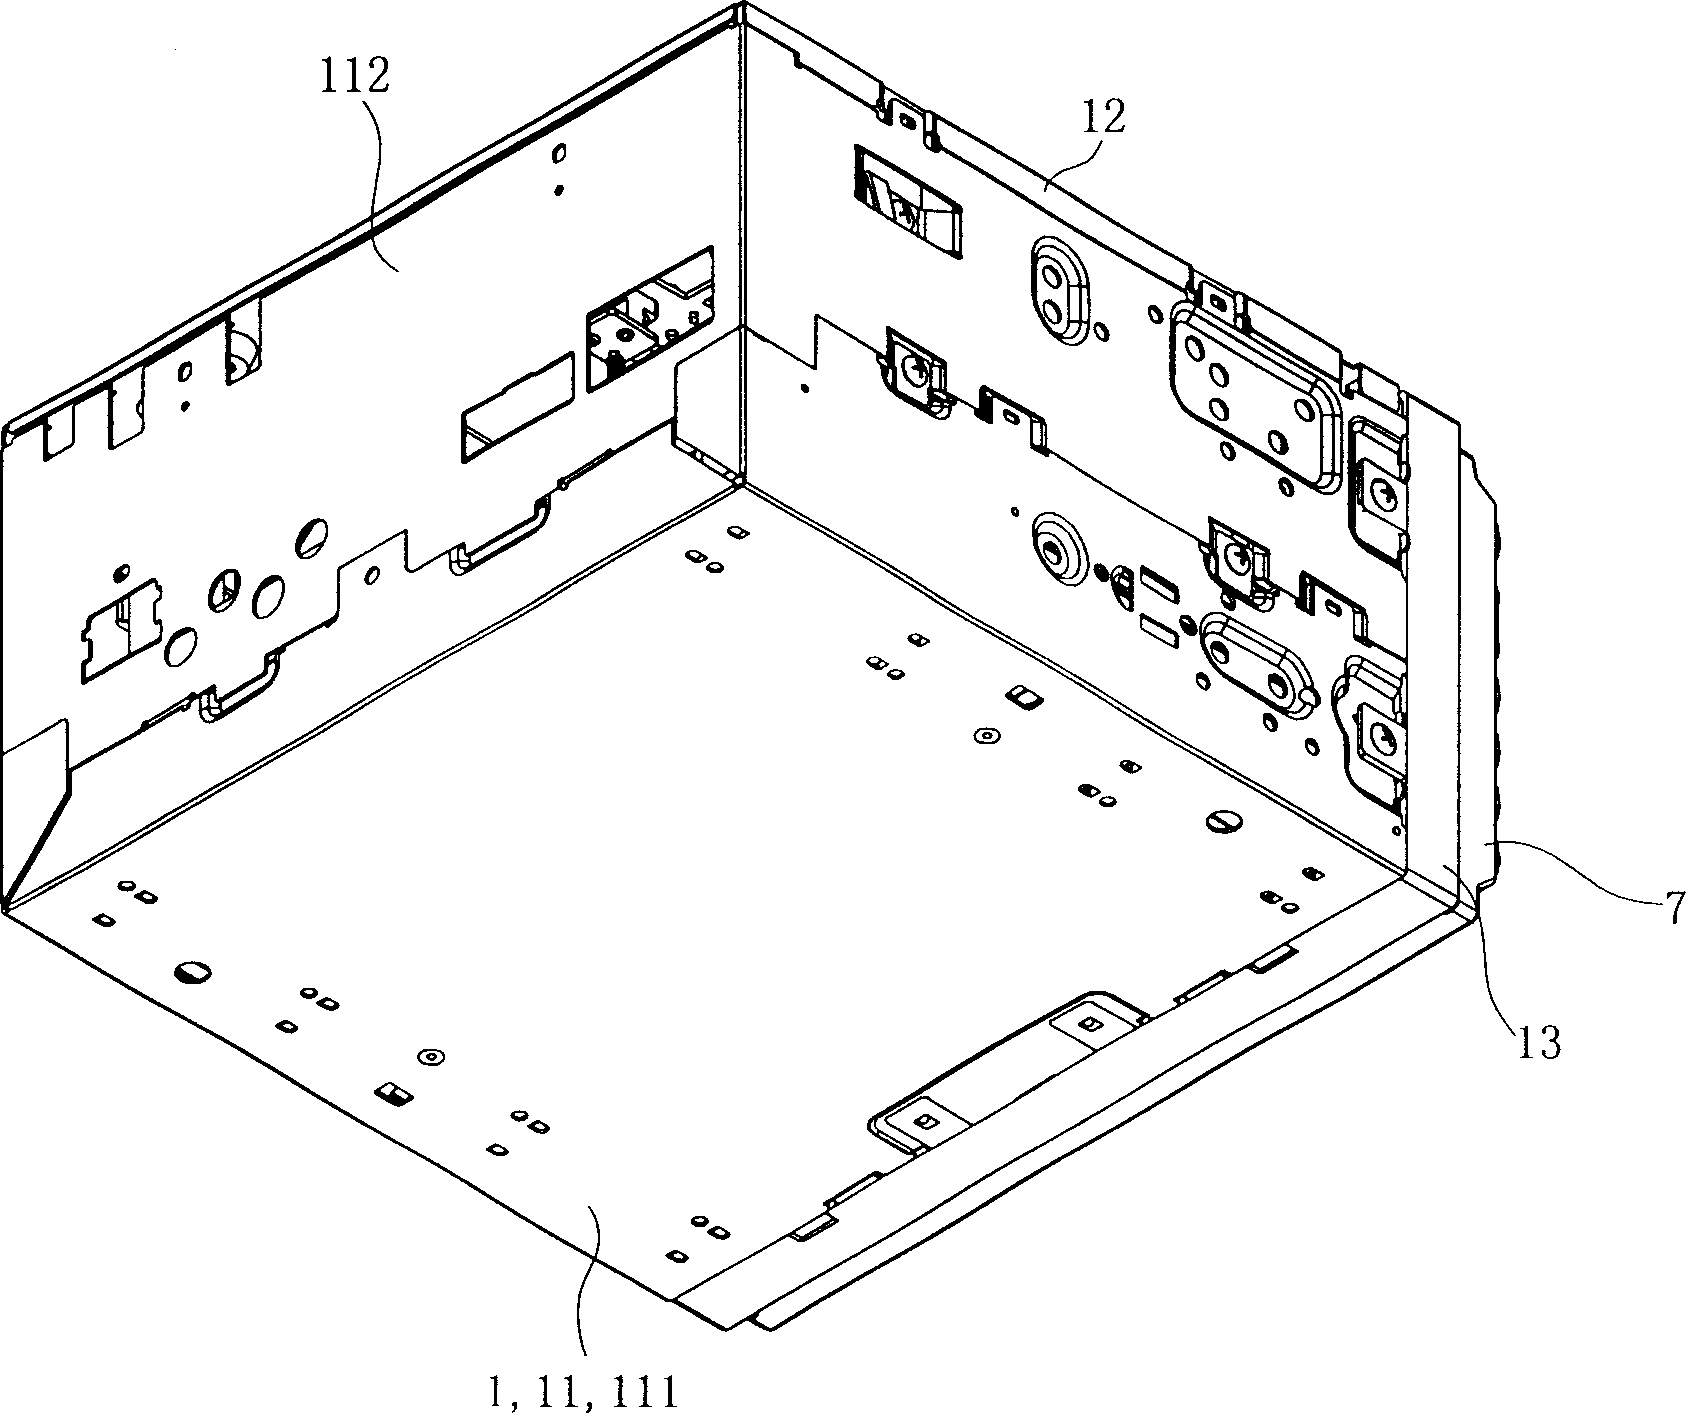 Mechanical parts of built-in vehicle video playing and displaying device